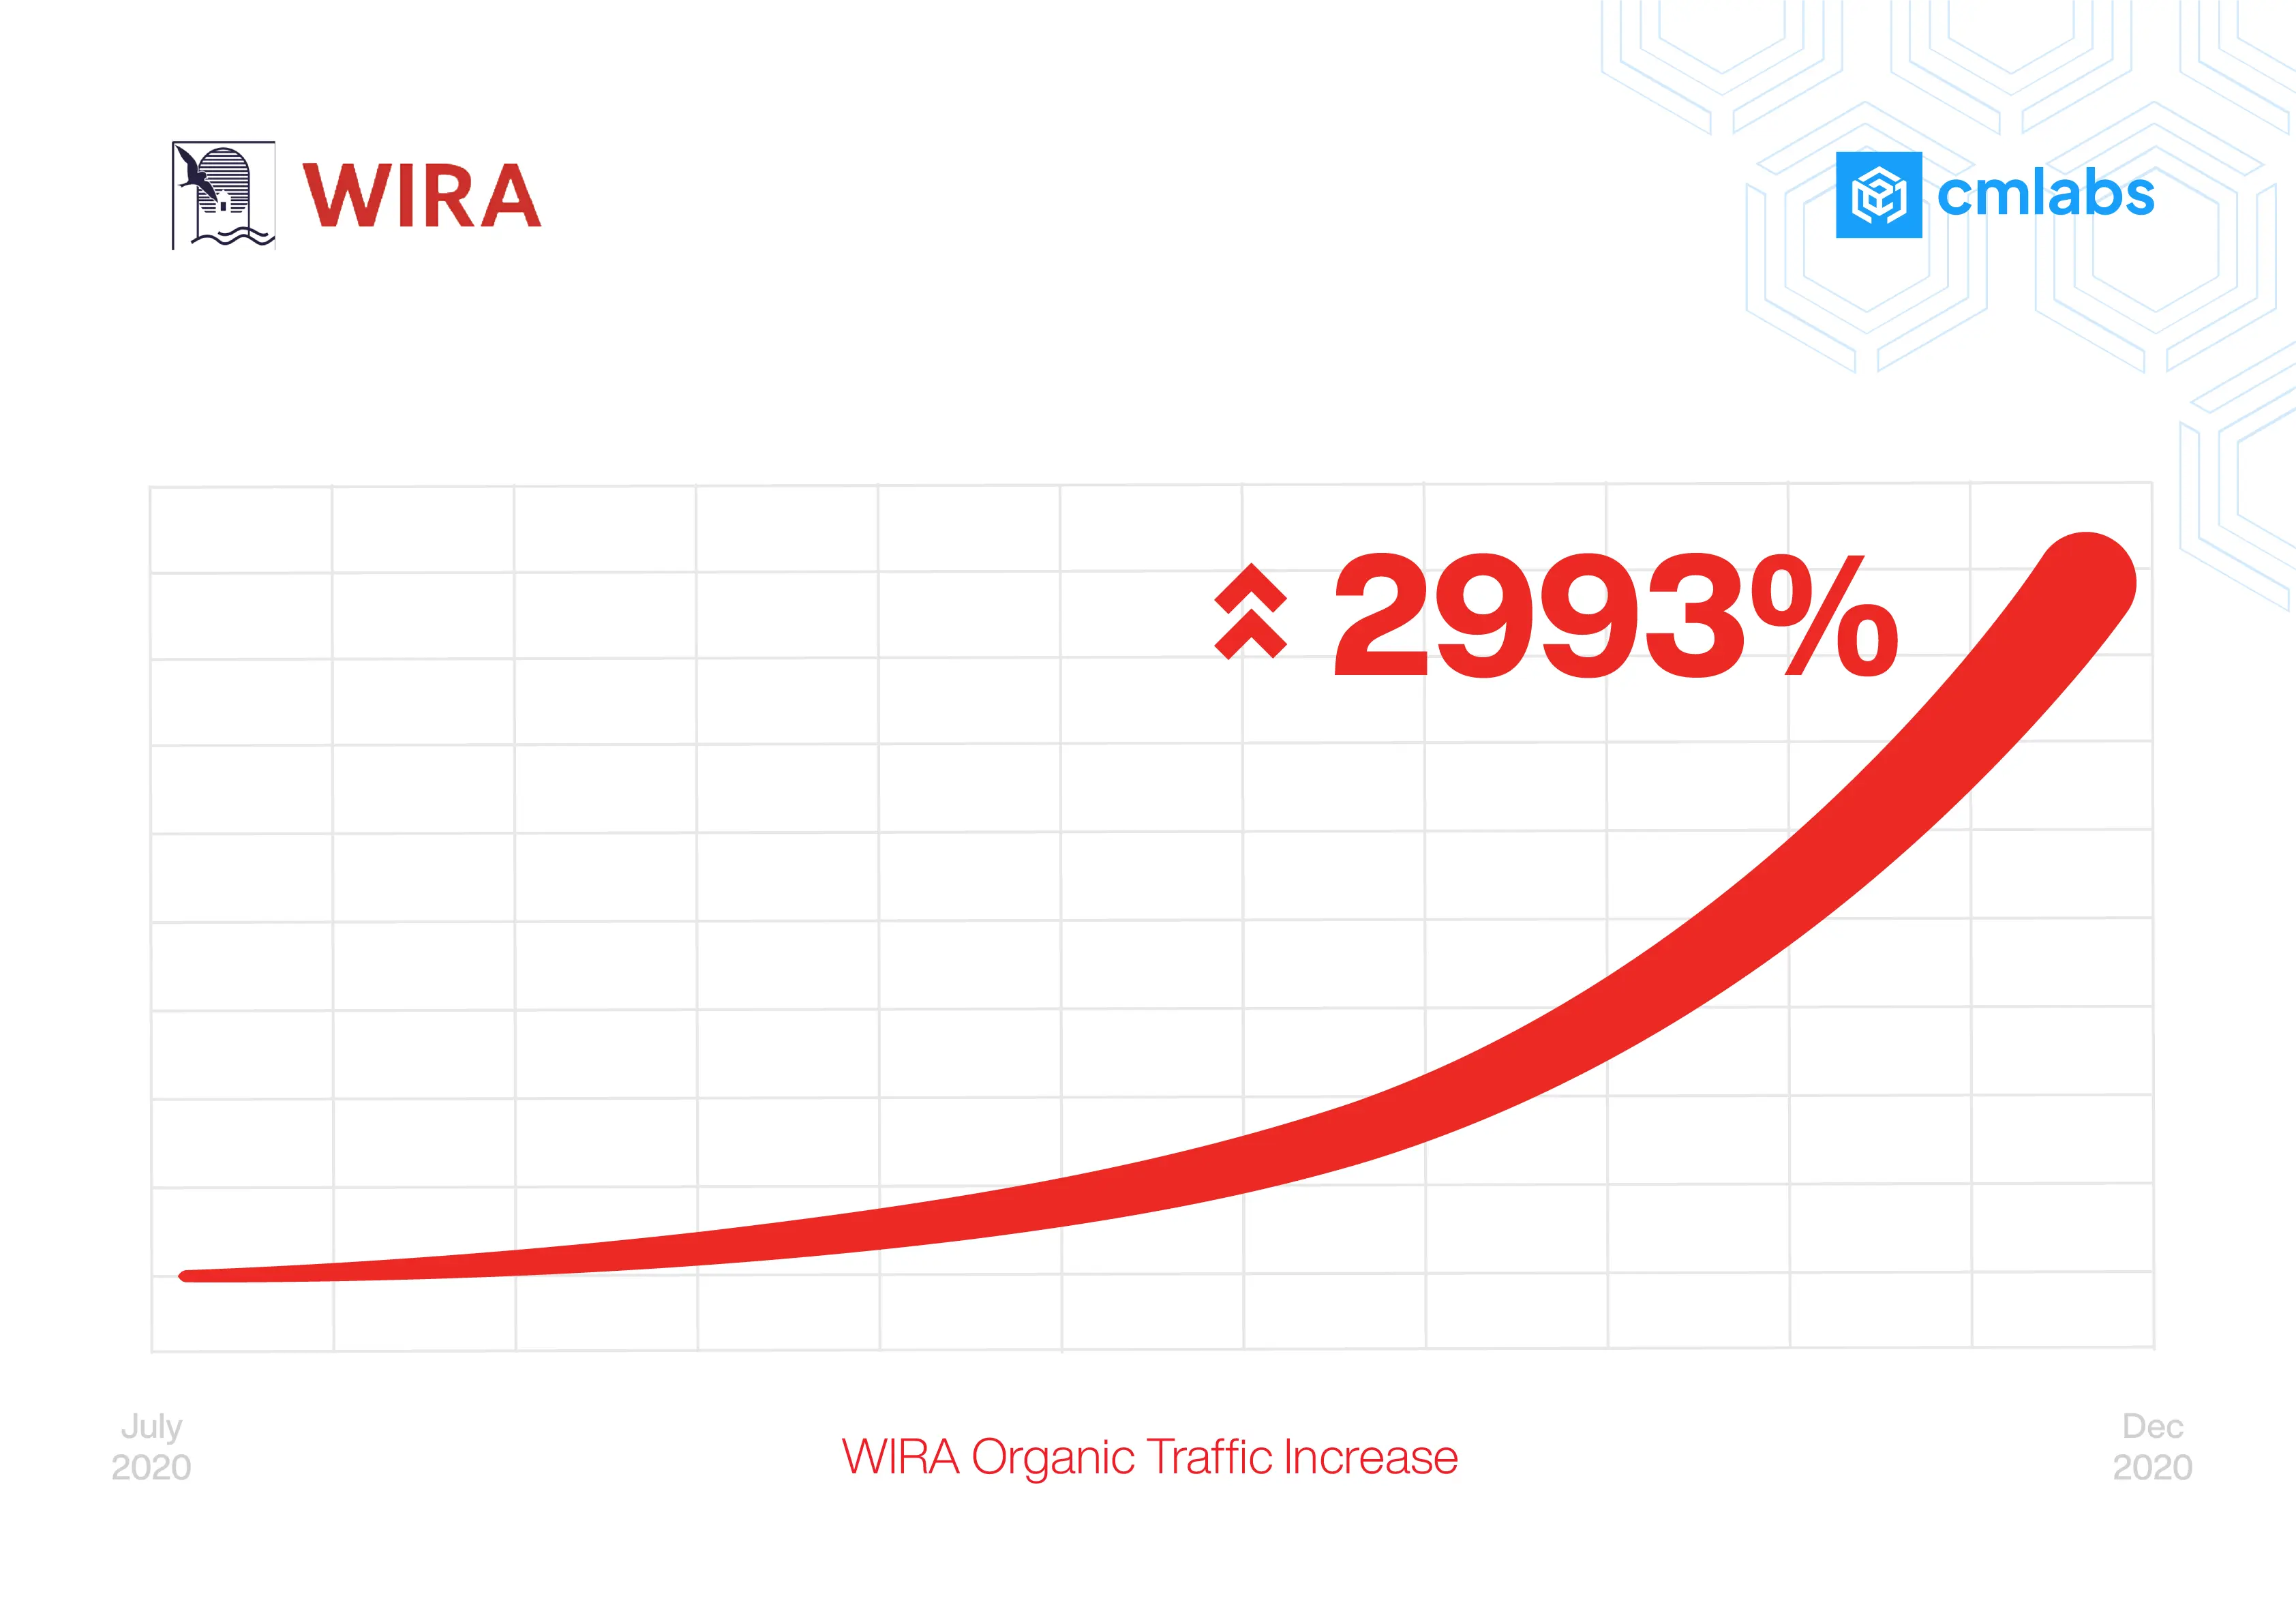 WIRA performance overview